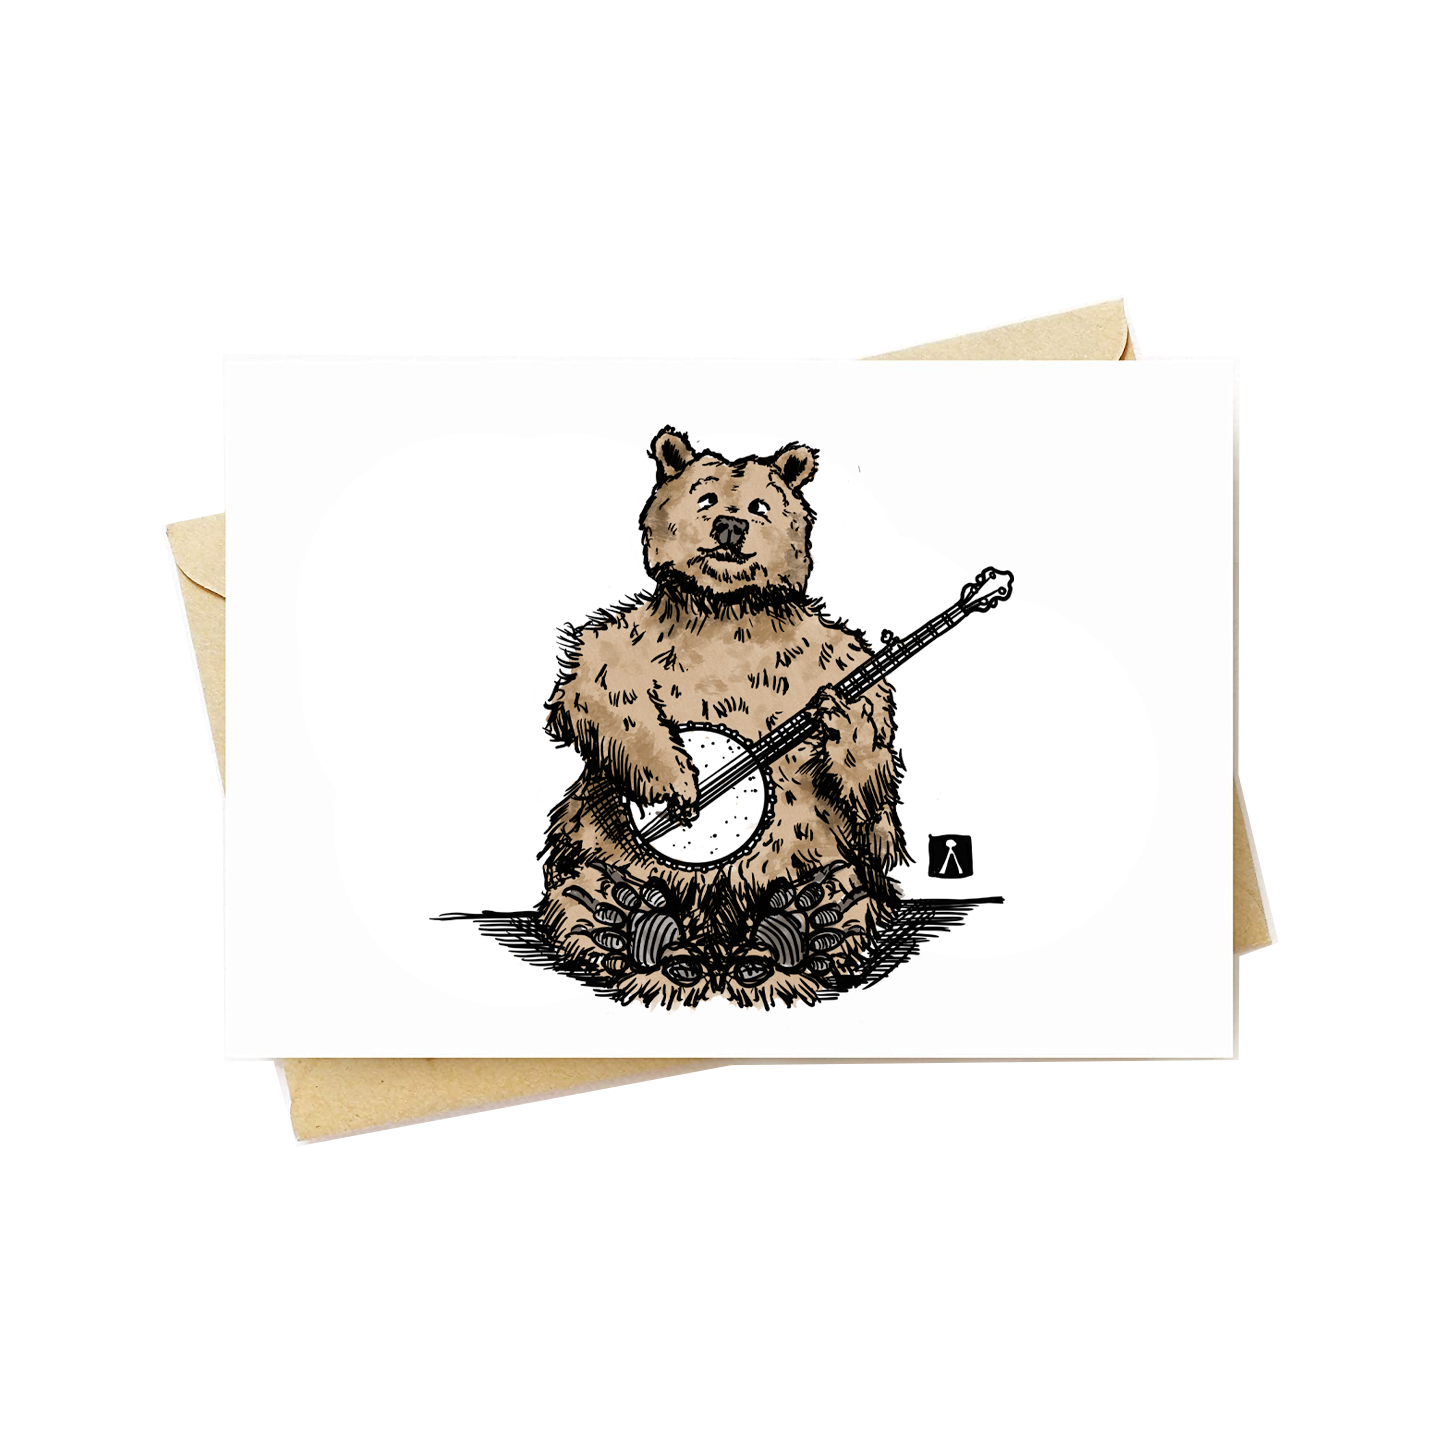 BellavanceInk: Greeting Card With A Pen & Ink Drawing Of A Grizzly Bear Playing The Banjo 5 x 7 Inches